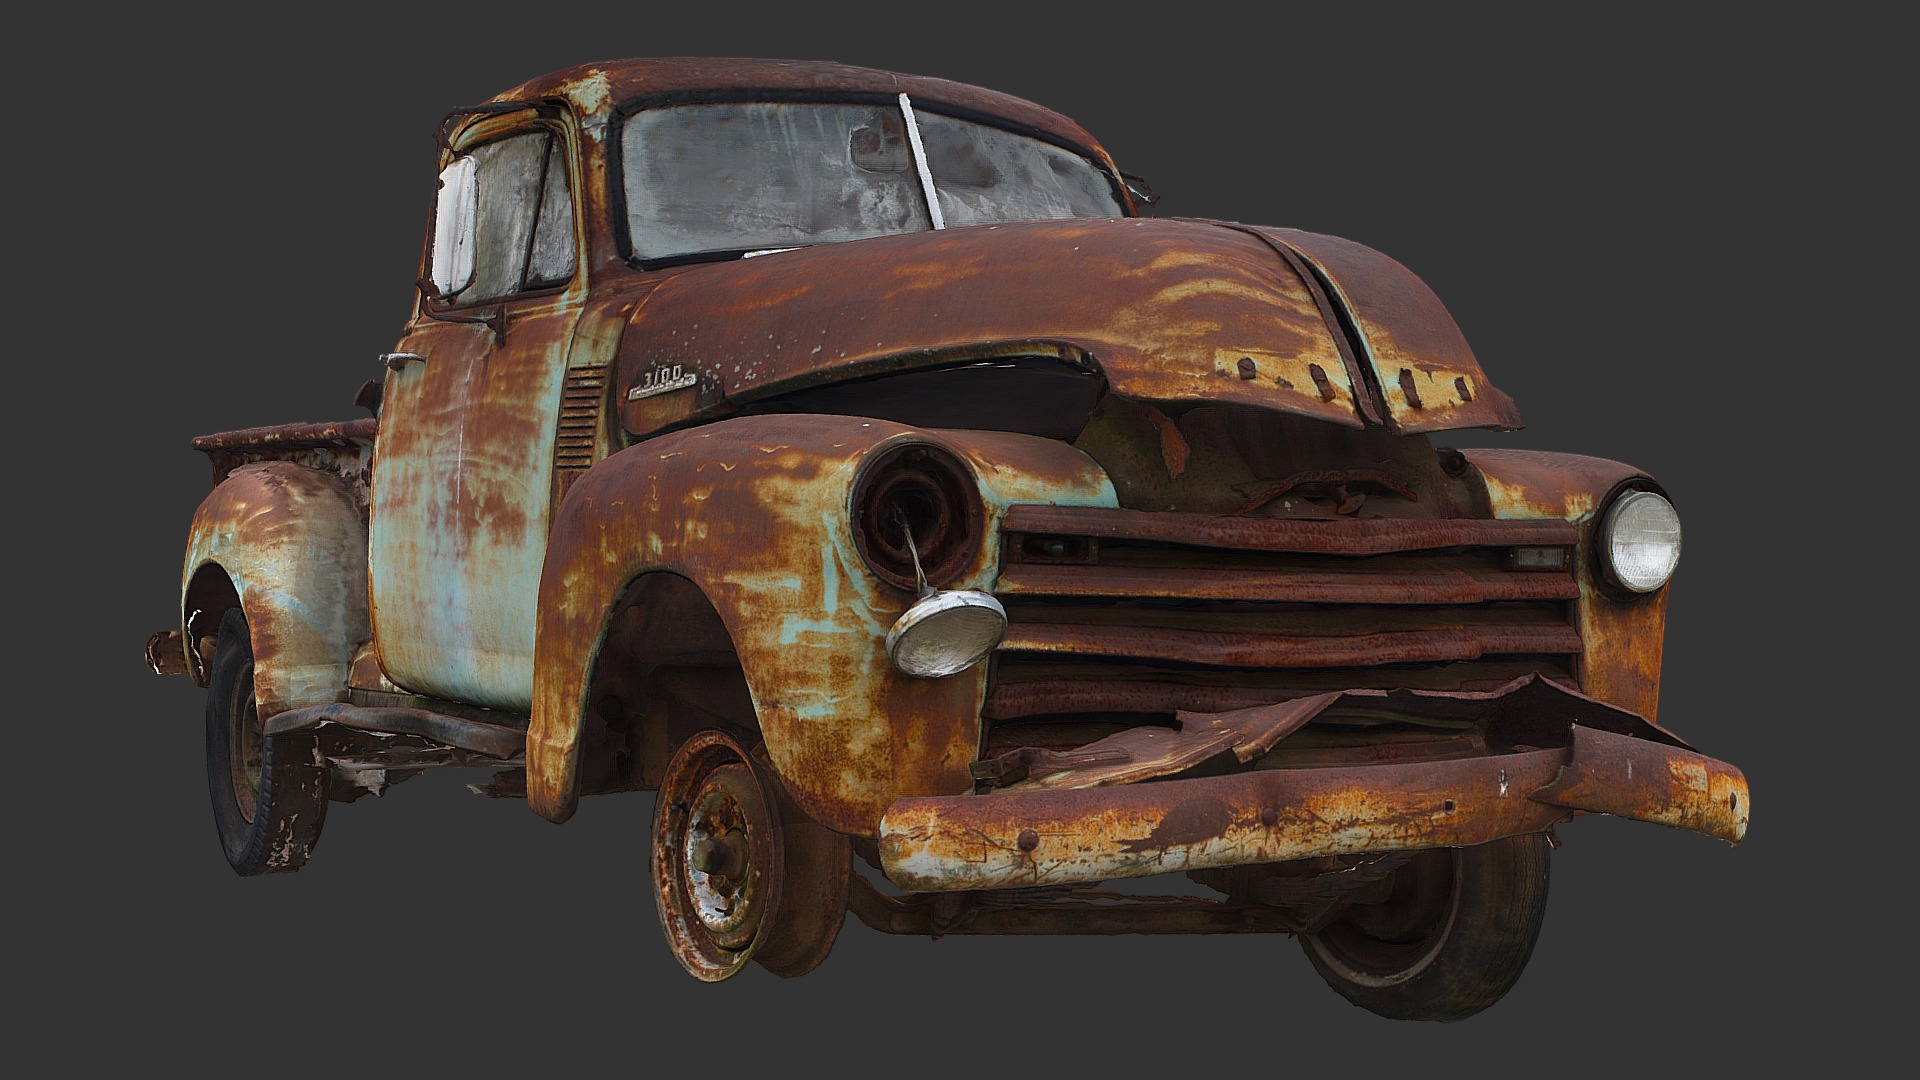 3D model Ramshackle Truck (Raw Scan) - This is a 3D model of the Ramshackle Truck (Raw Scan). The 3D model is about a rusted out car.